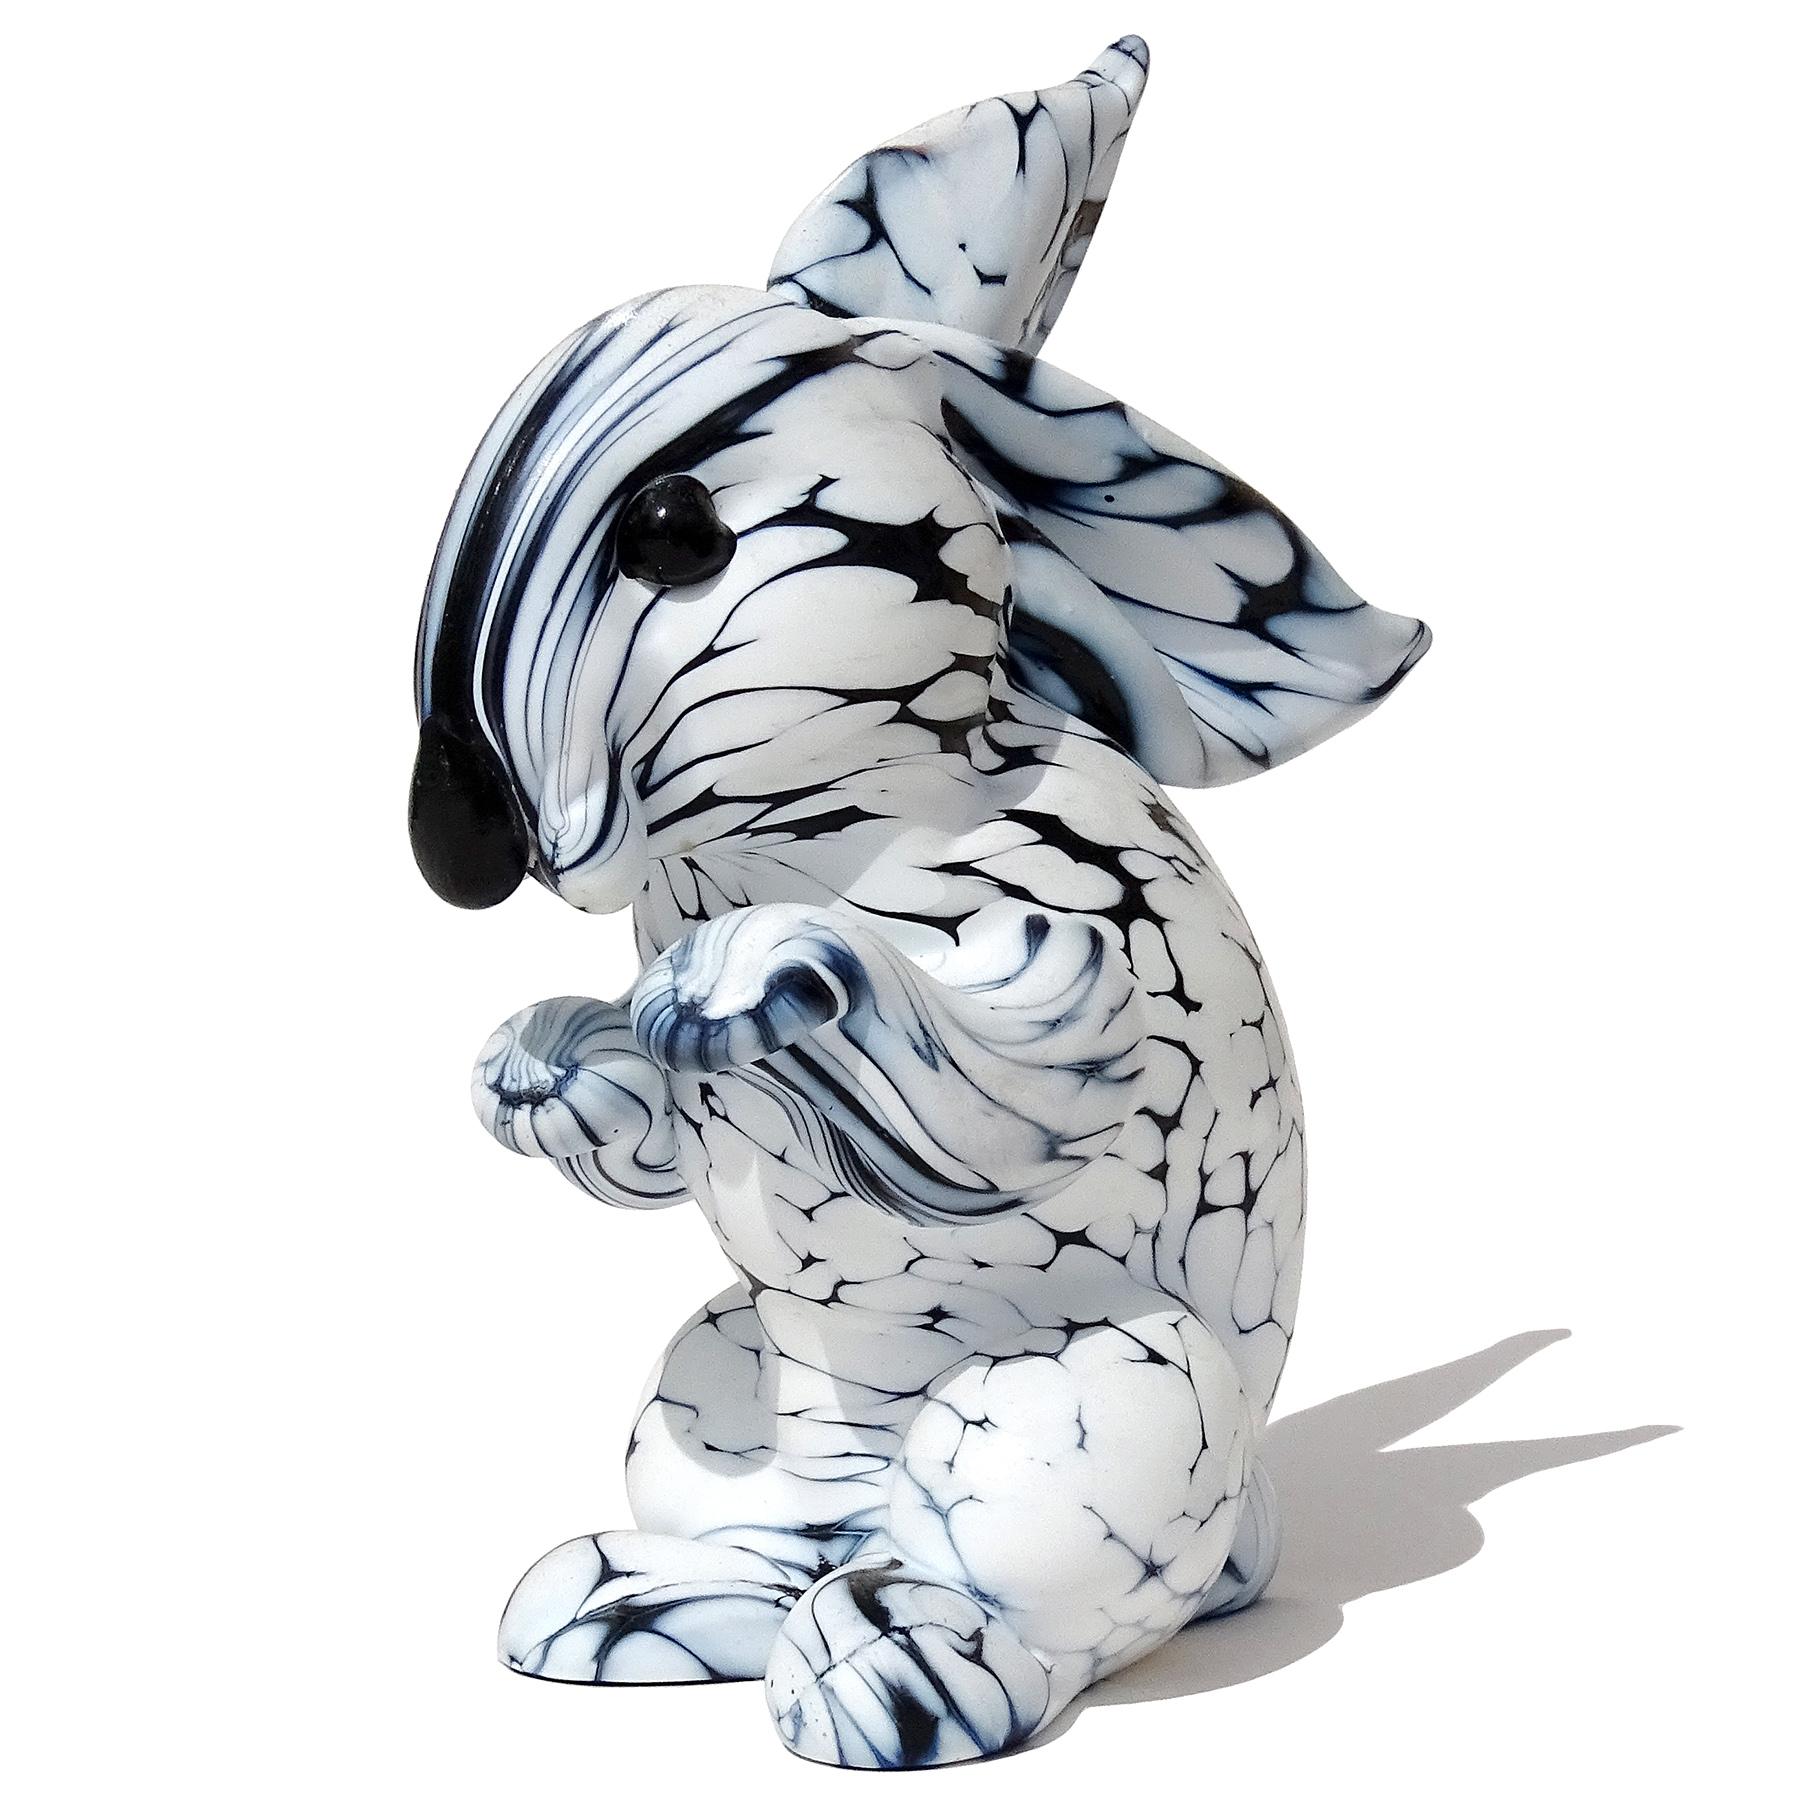 Beautiful vintage Murano hand blown black and white spotted Italian art glass bunny rabbit figurine sculpture. Documented to designer Archimede Seguso, from the 